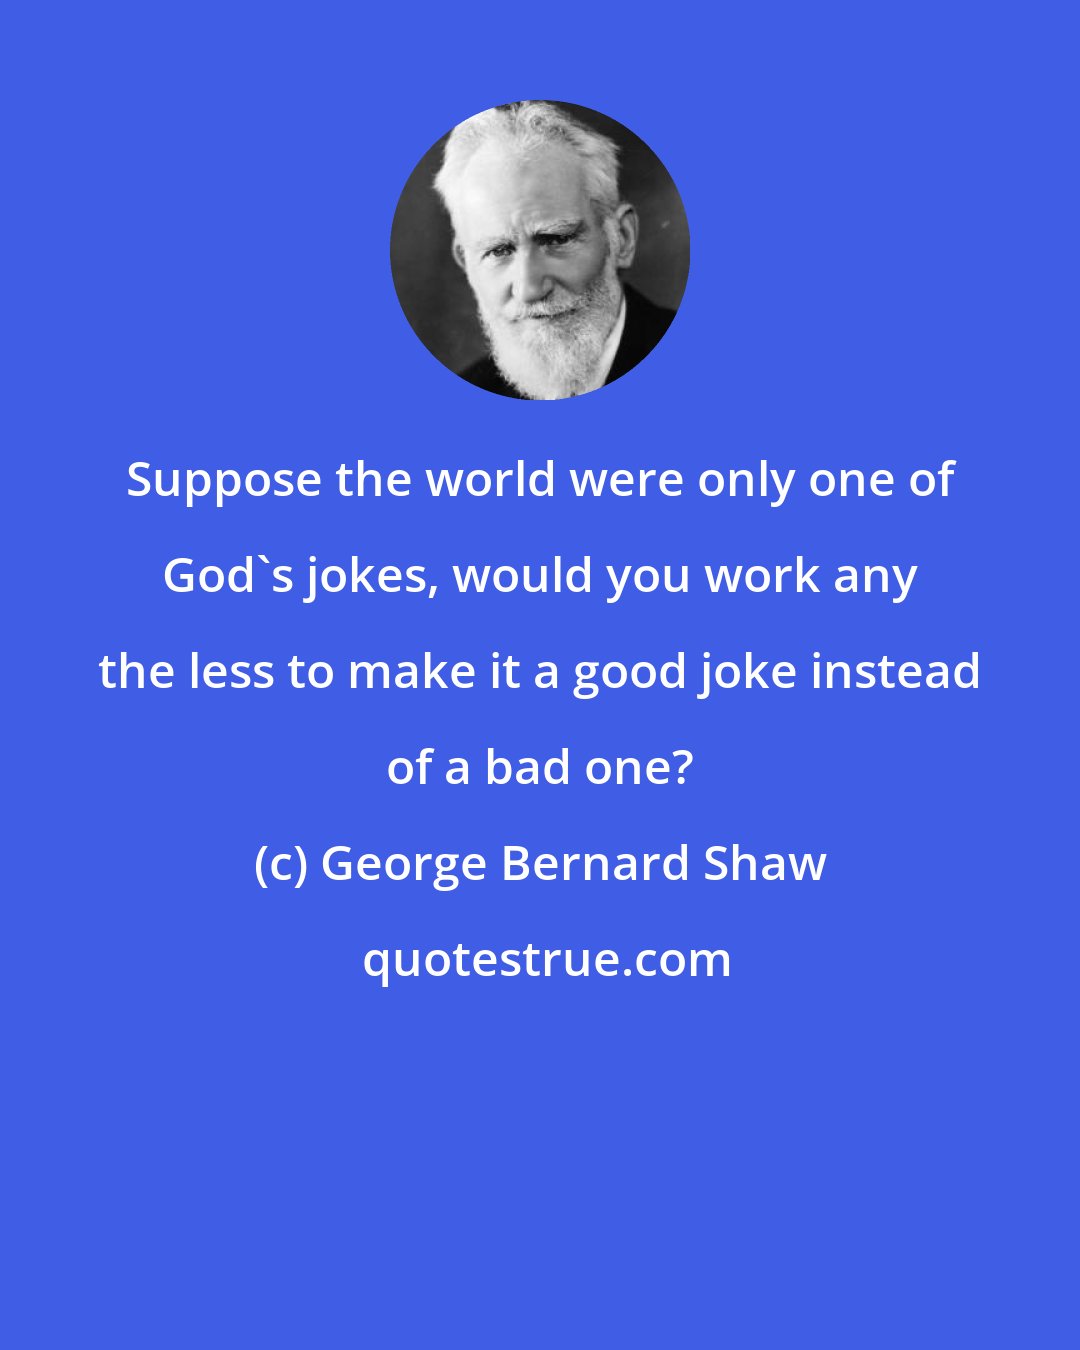 George Bernard Shaw: Suppose the world were only one of God's jokes, would you work any the less to make it a good joke instead of a bad one?